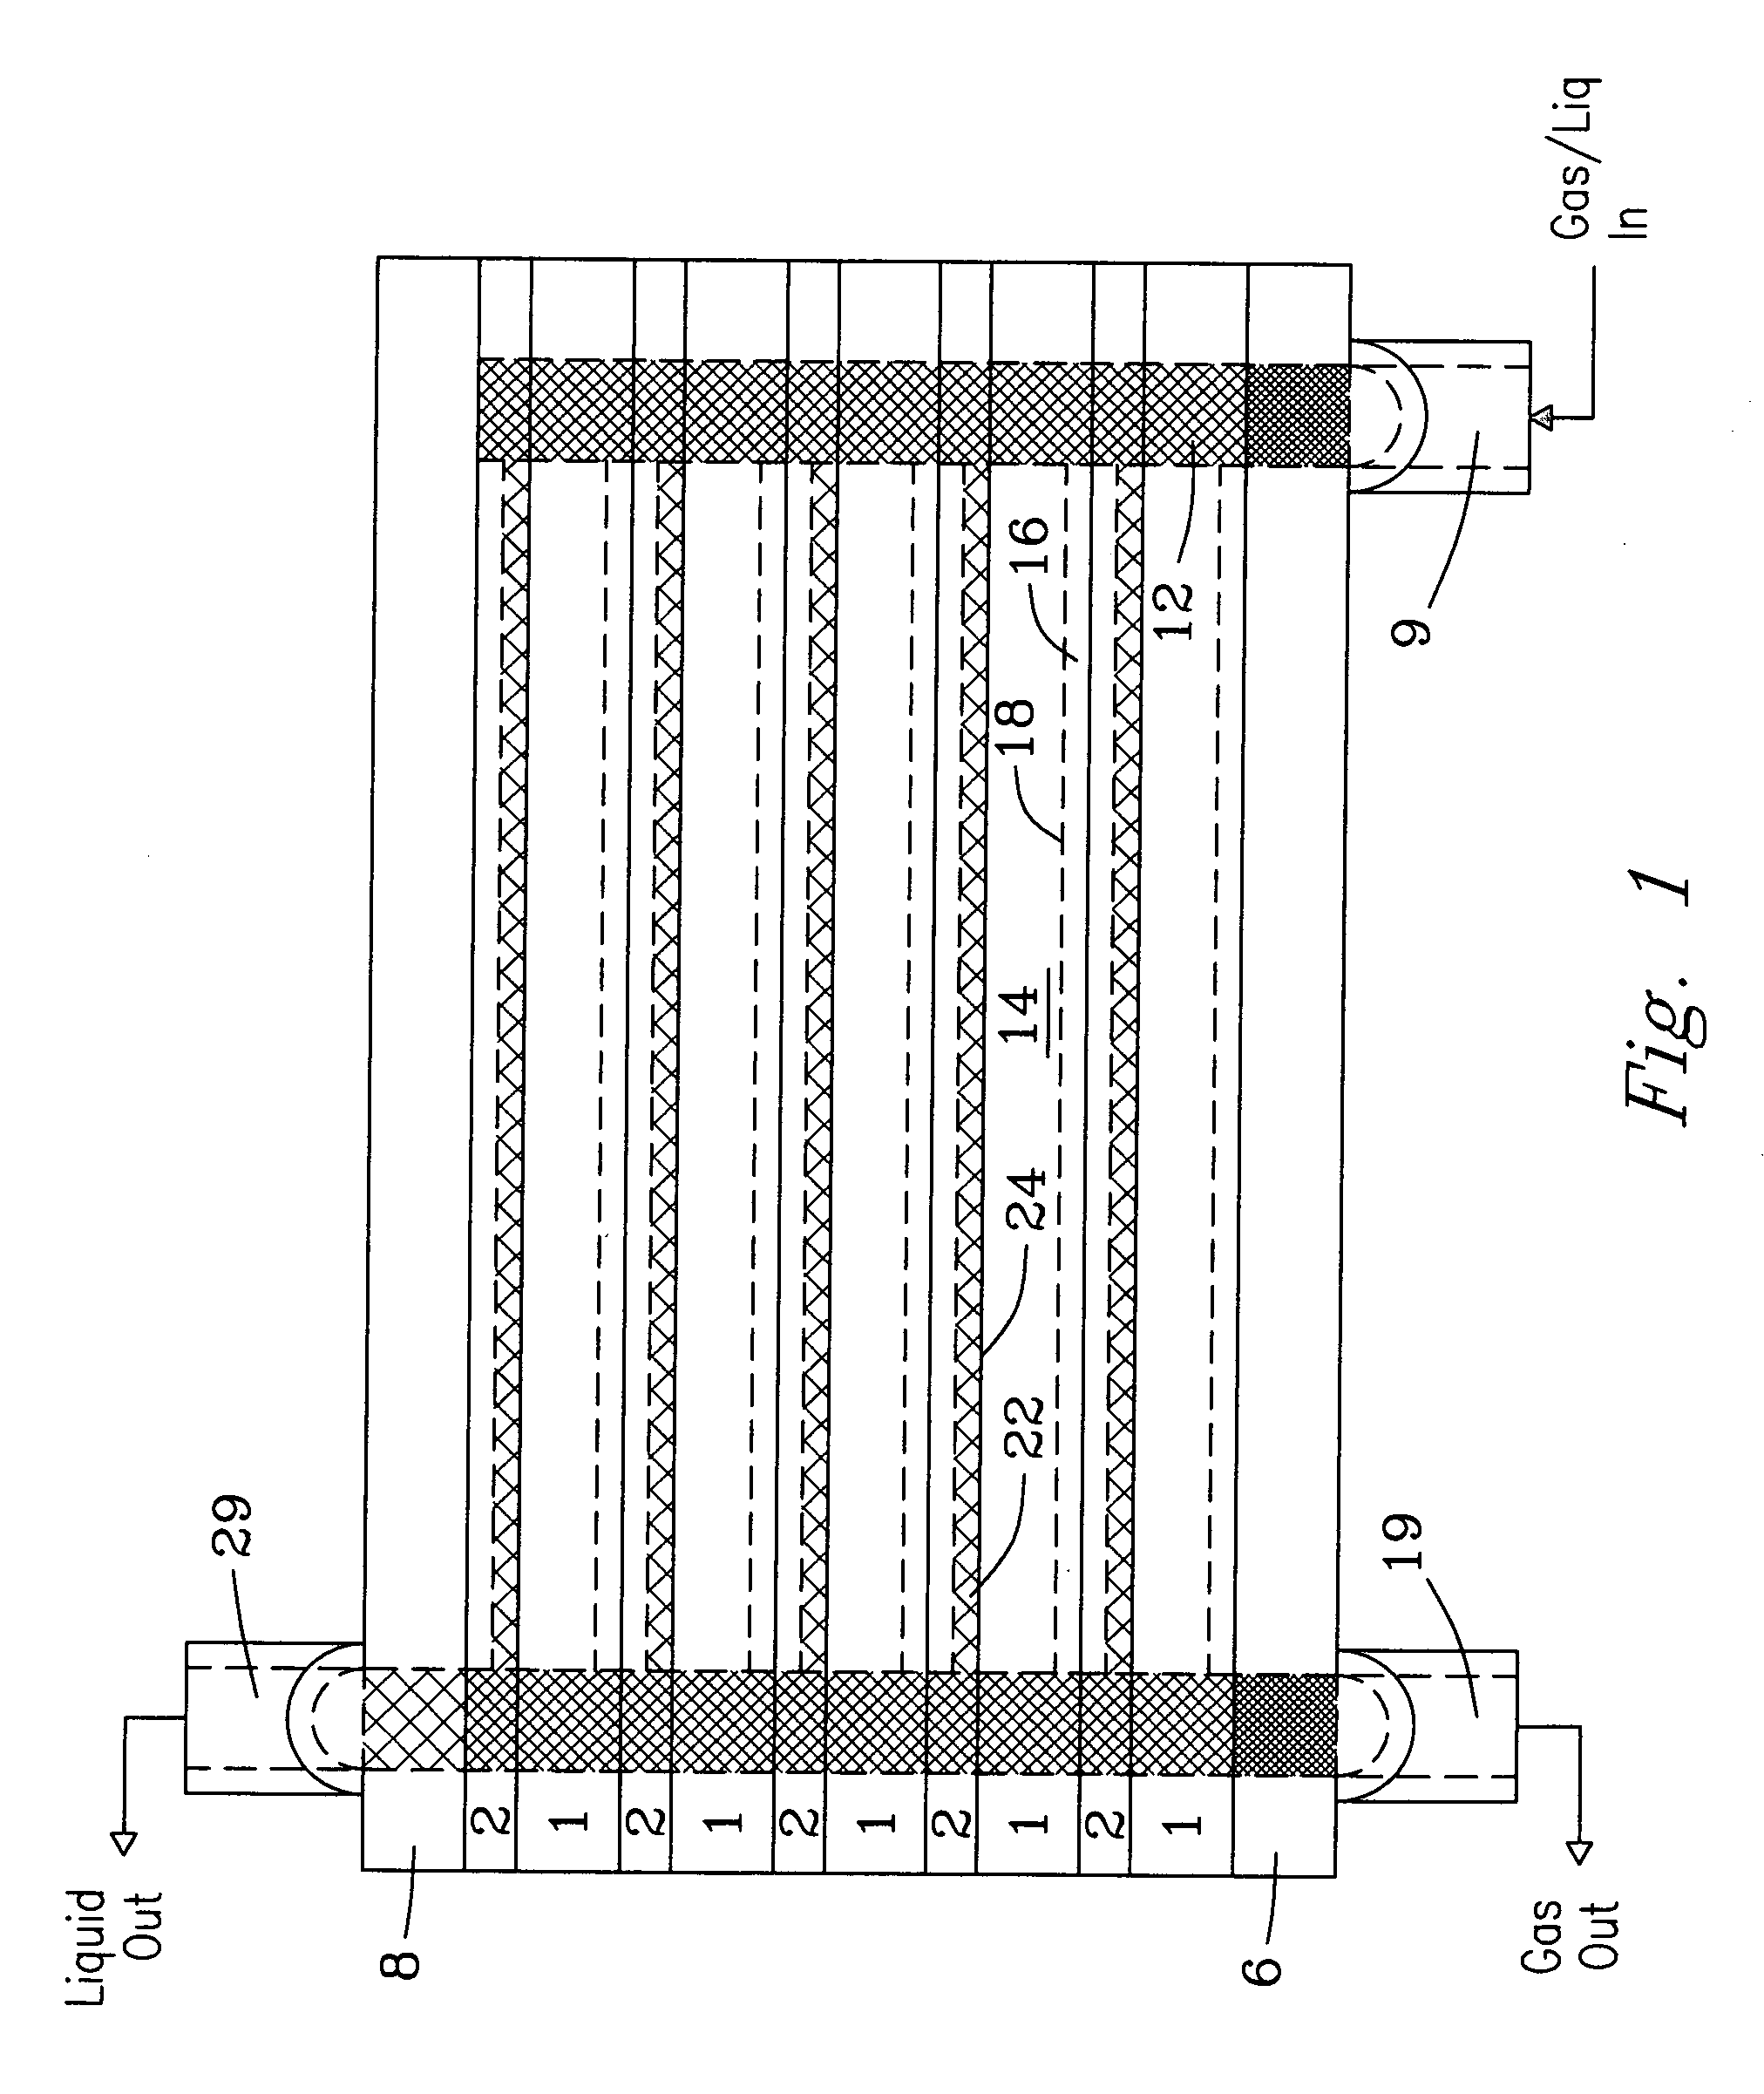 Conditions for fluid separations in microchannels, capillary-driven fluid separations, and laminated devices capable of separating fluids